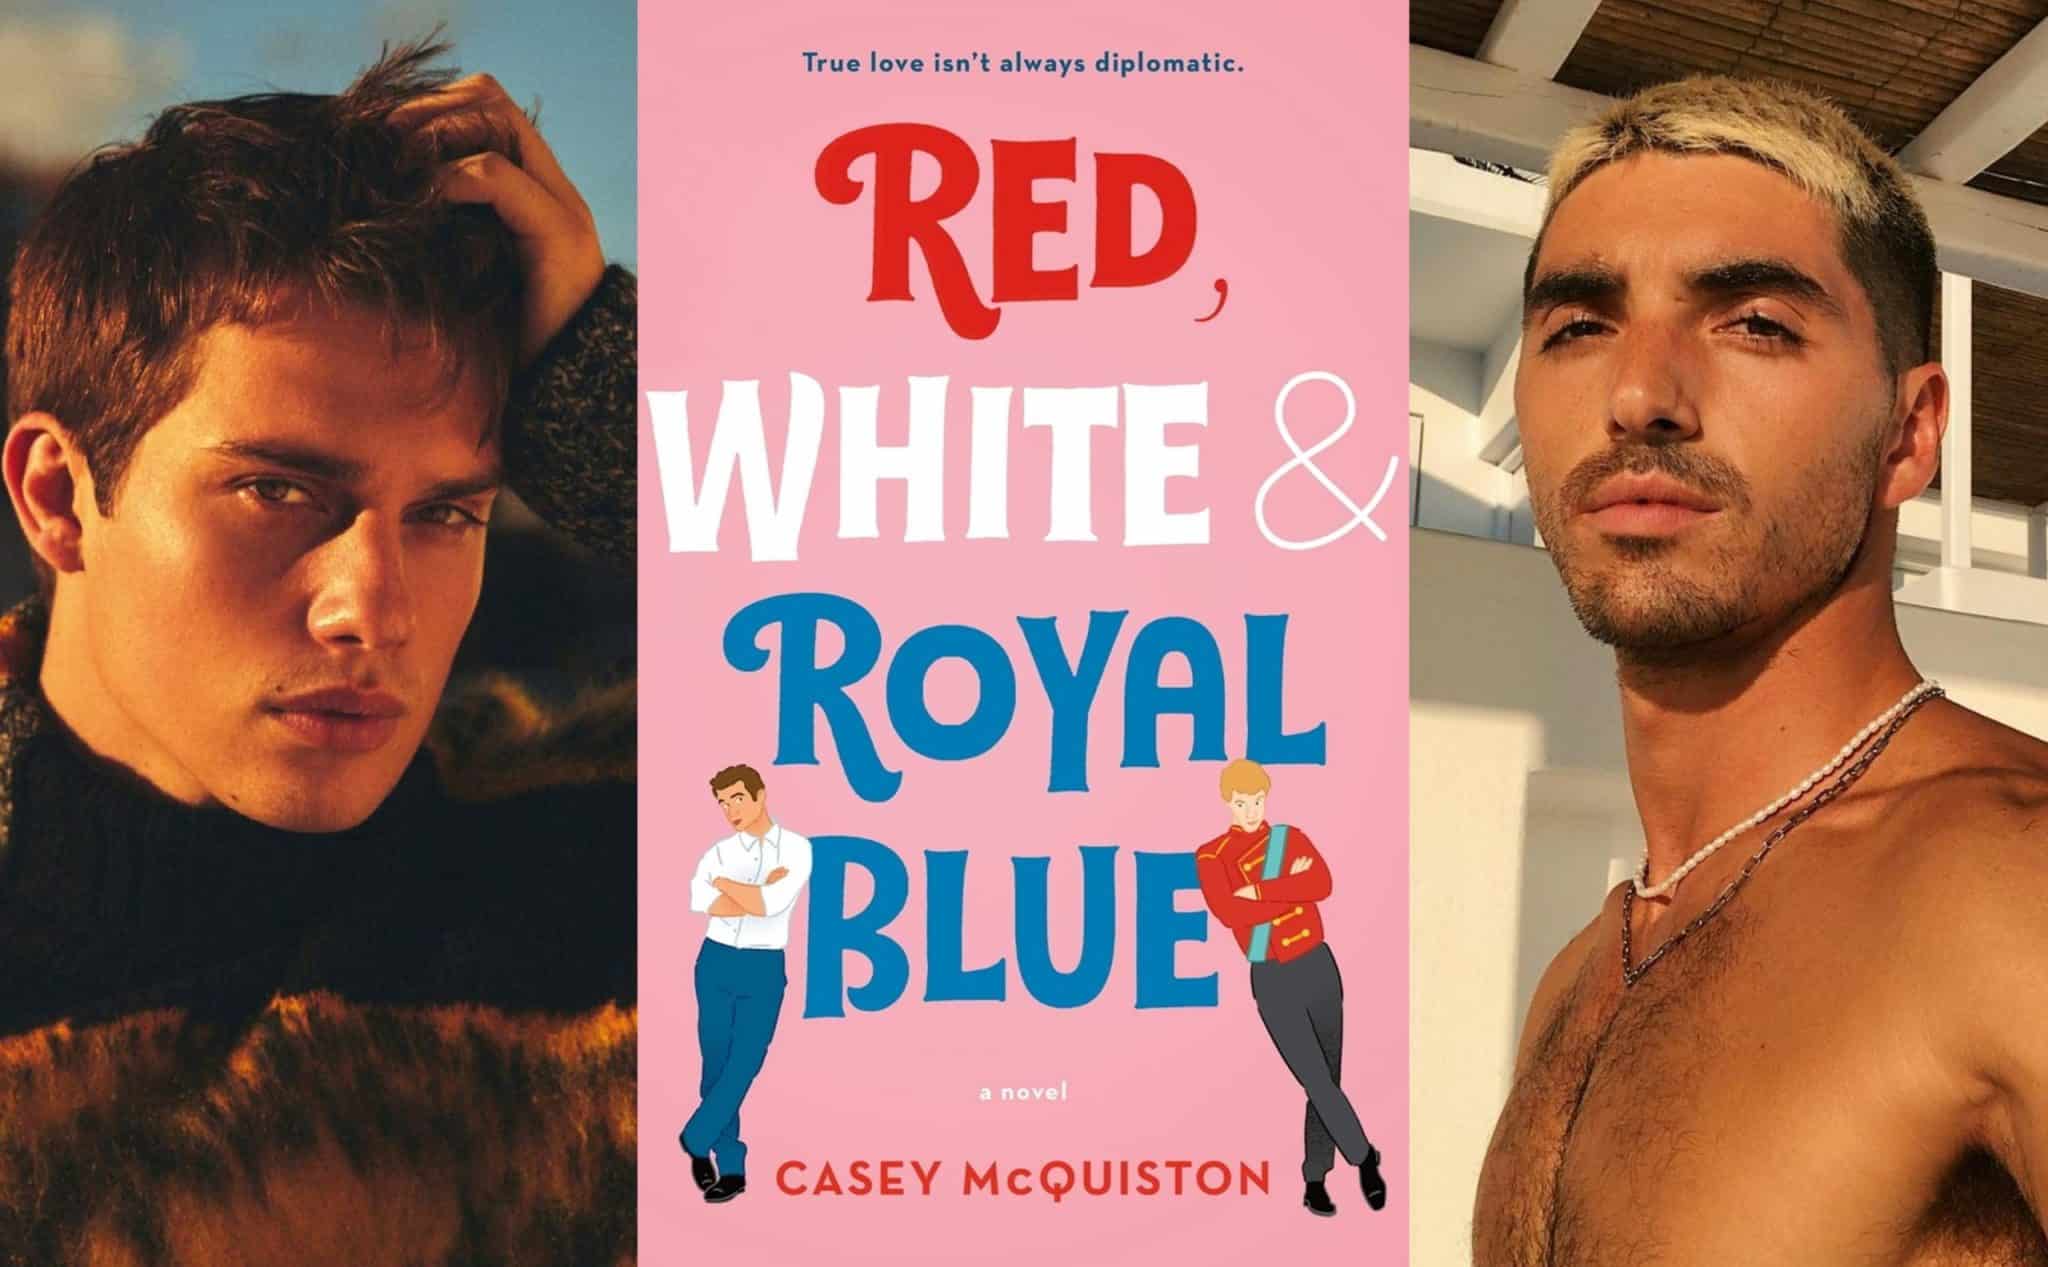 Meet the Swoonworthy Cast of Casey McQuiston's 'Red White & Royal Blue'